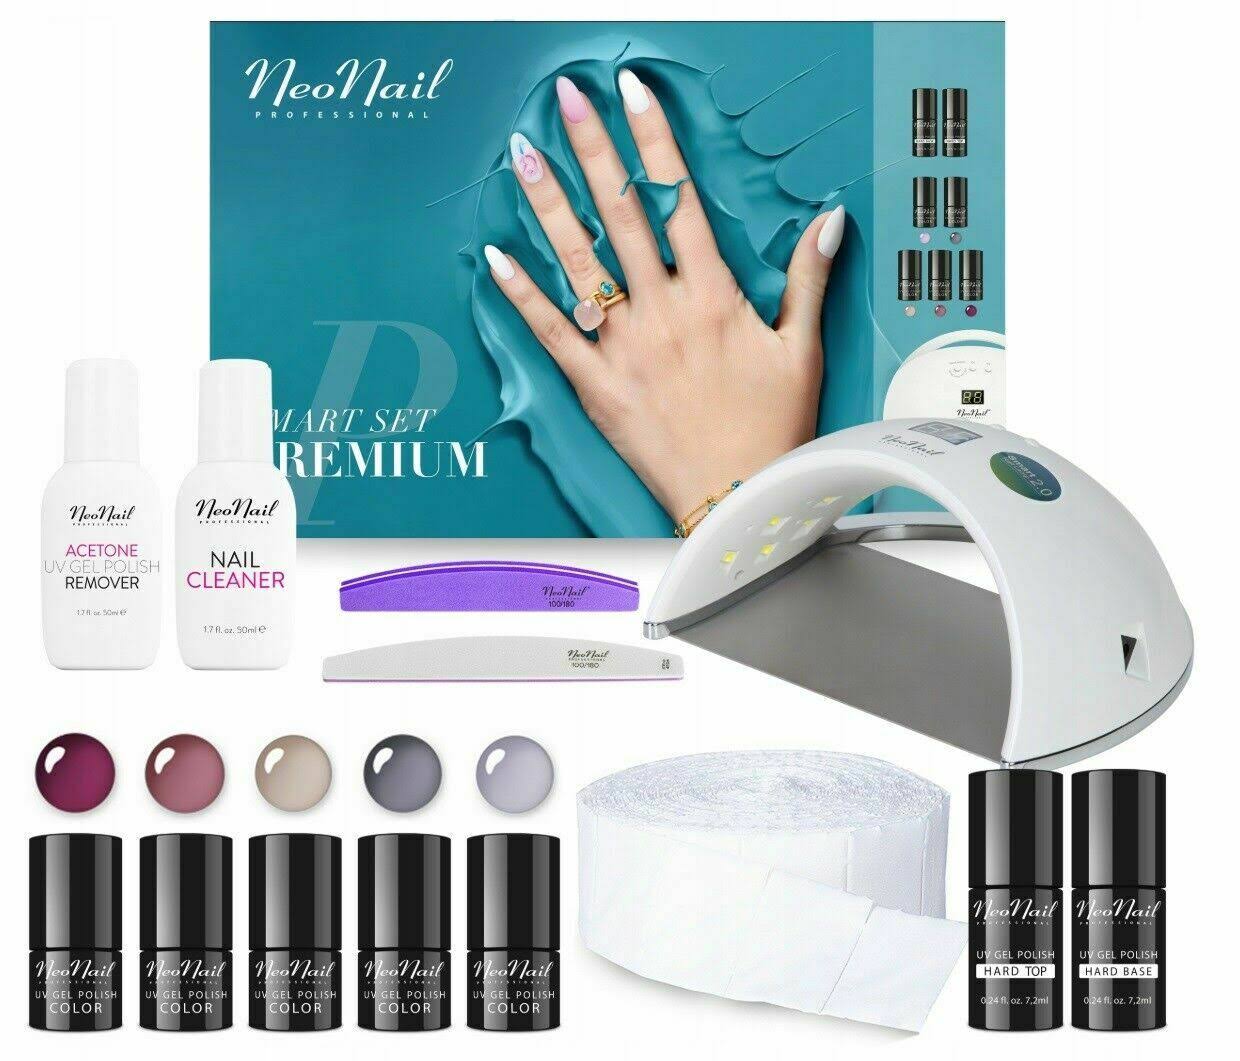 Maguire Hair & Beauty Supplies - Cavan - Neonail Smart Set Premium - UV  Hybrid, Manicure, UV Led Lamp - Perfect for Gift | Pointy